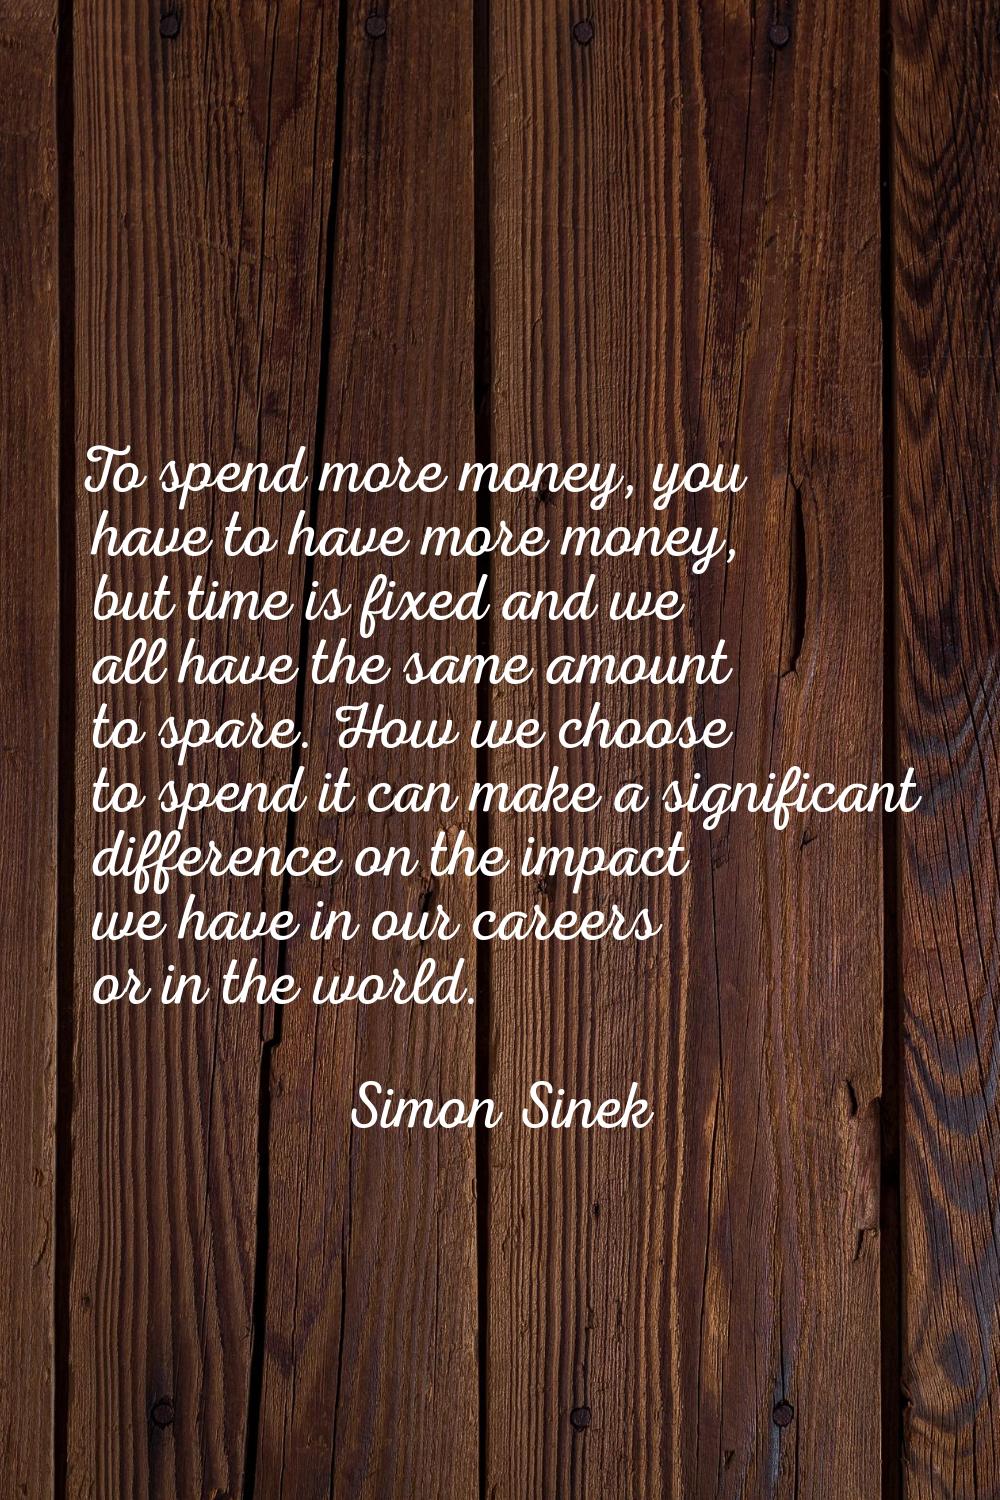 To spend more money, you have to have more money, but time is fixed and we all have the same amount